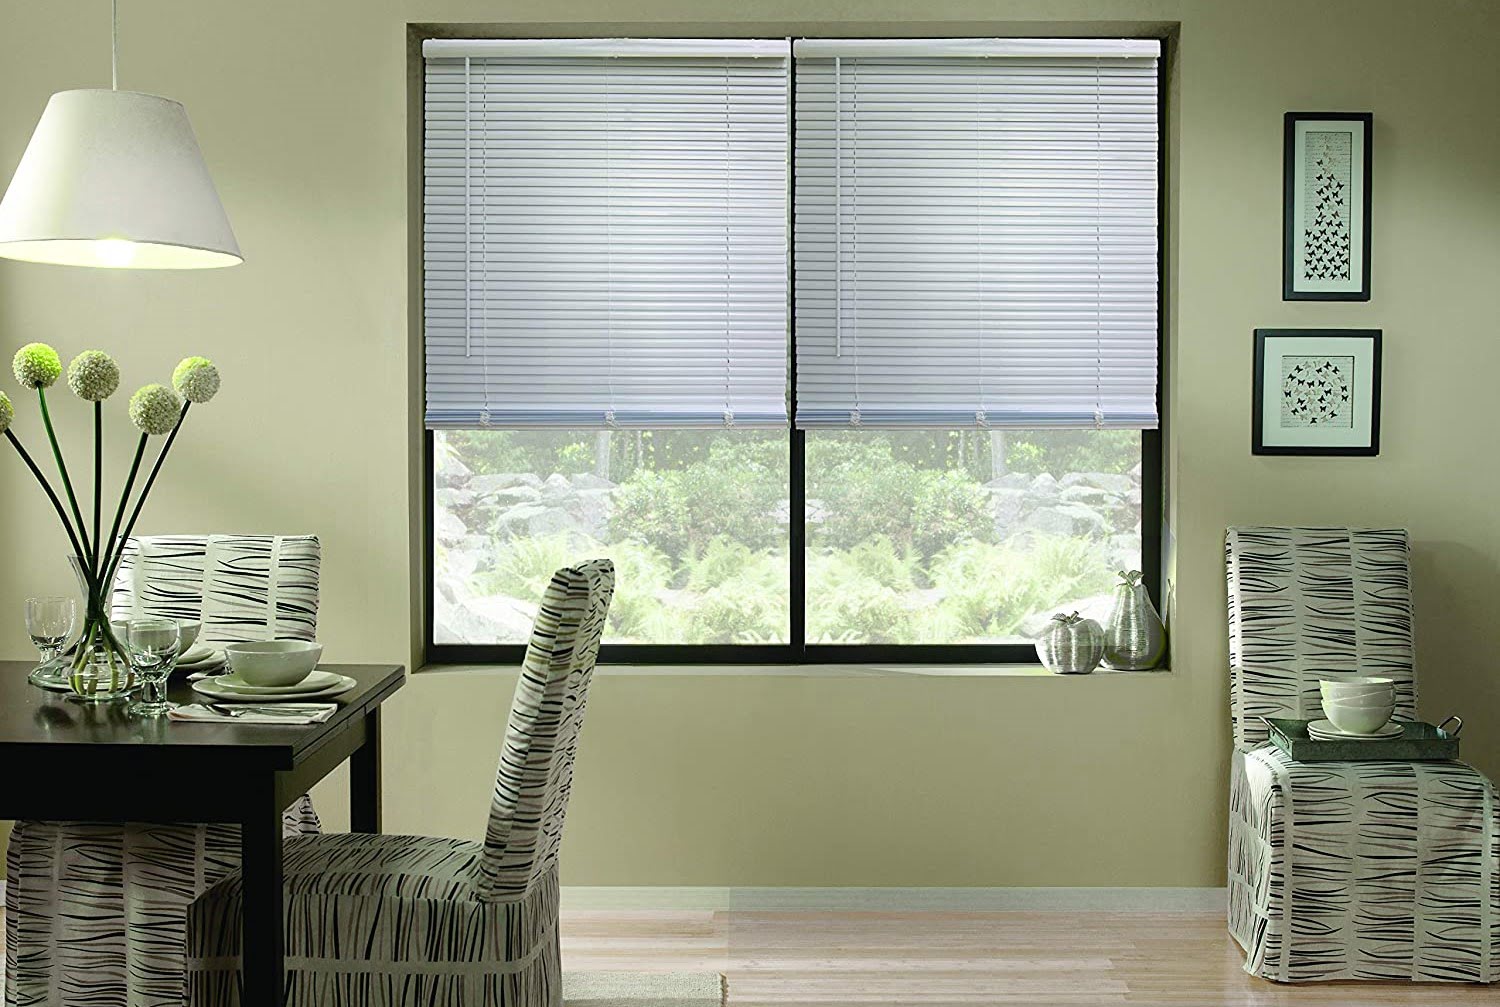 How To Fix Cordless Blinds That Won’t Go Up Or Down